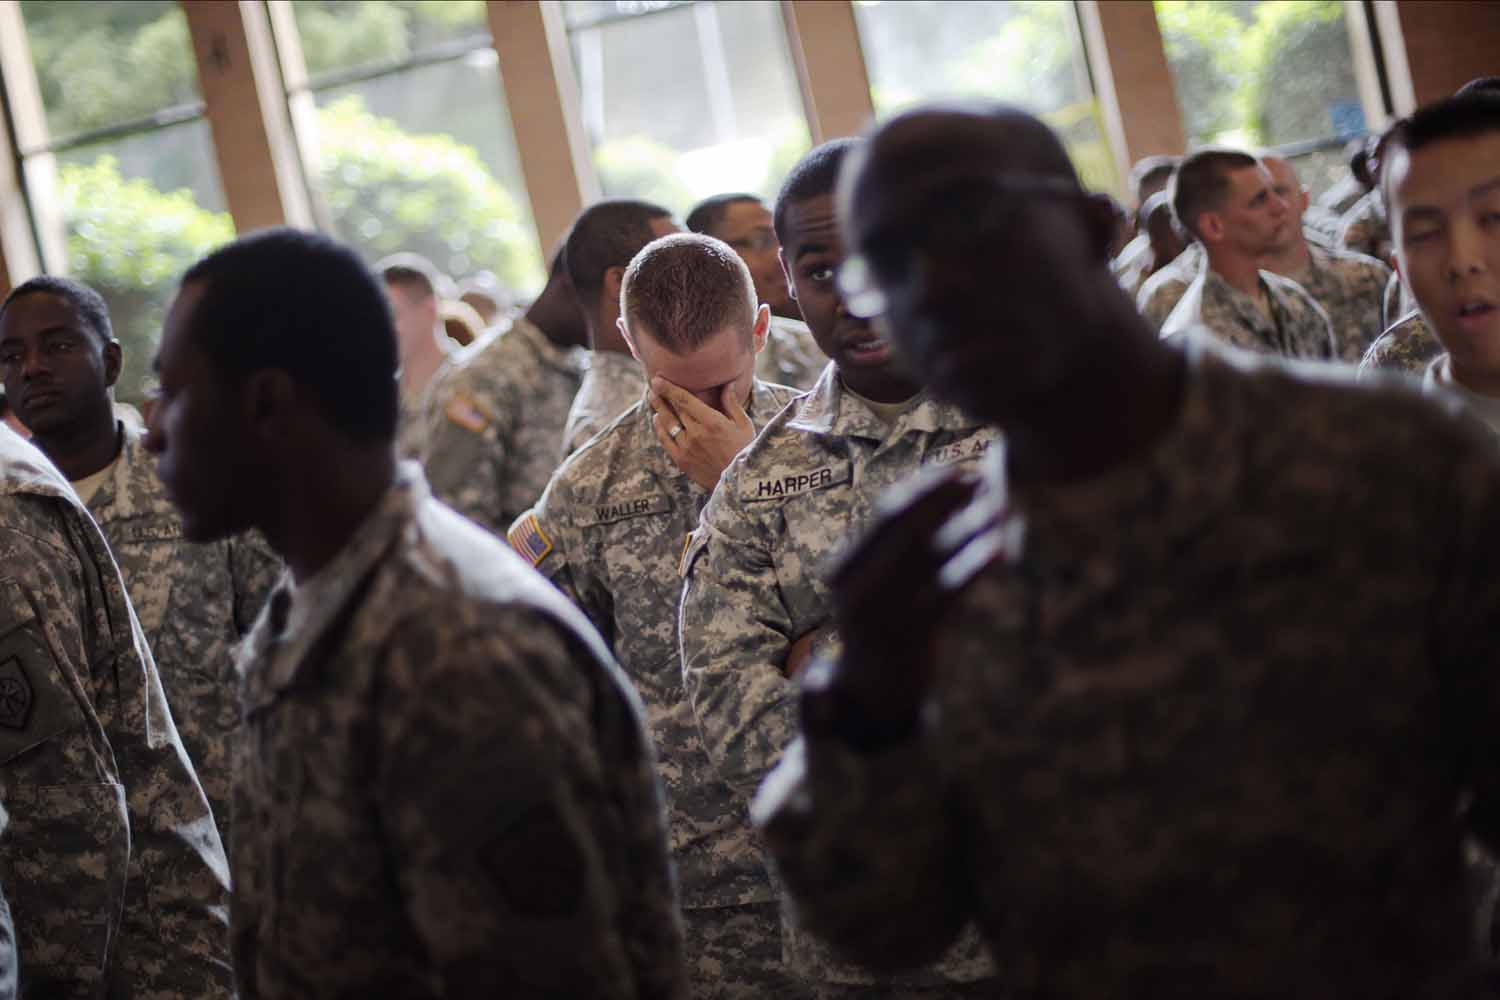 May 29, 2014. Sgt. Shaun Waller, of Winder, Ga., center, with the Georgia National Guard 876th Vertical EN Company waits with his fellow soldiers to enter a departure ceremony before the unit deploys to Afghanistan,  in Toccoa, Ga.